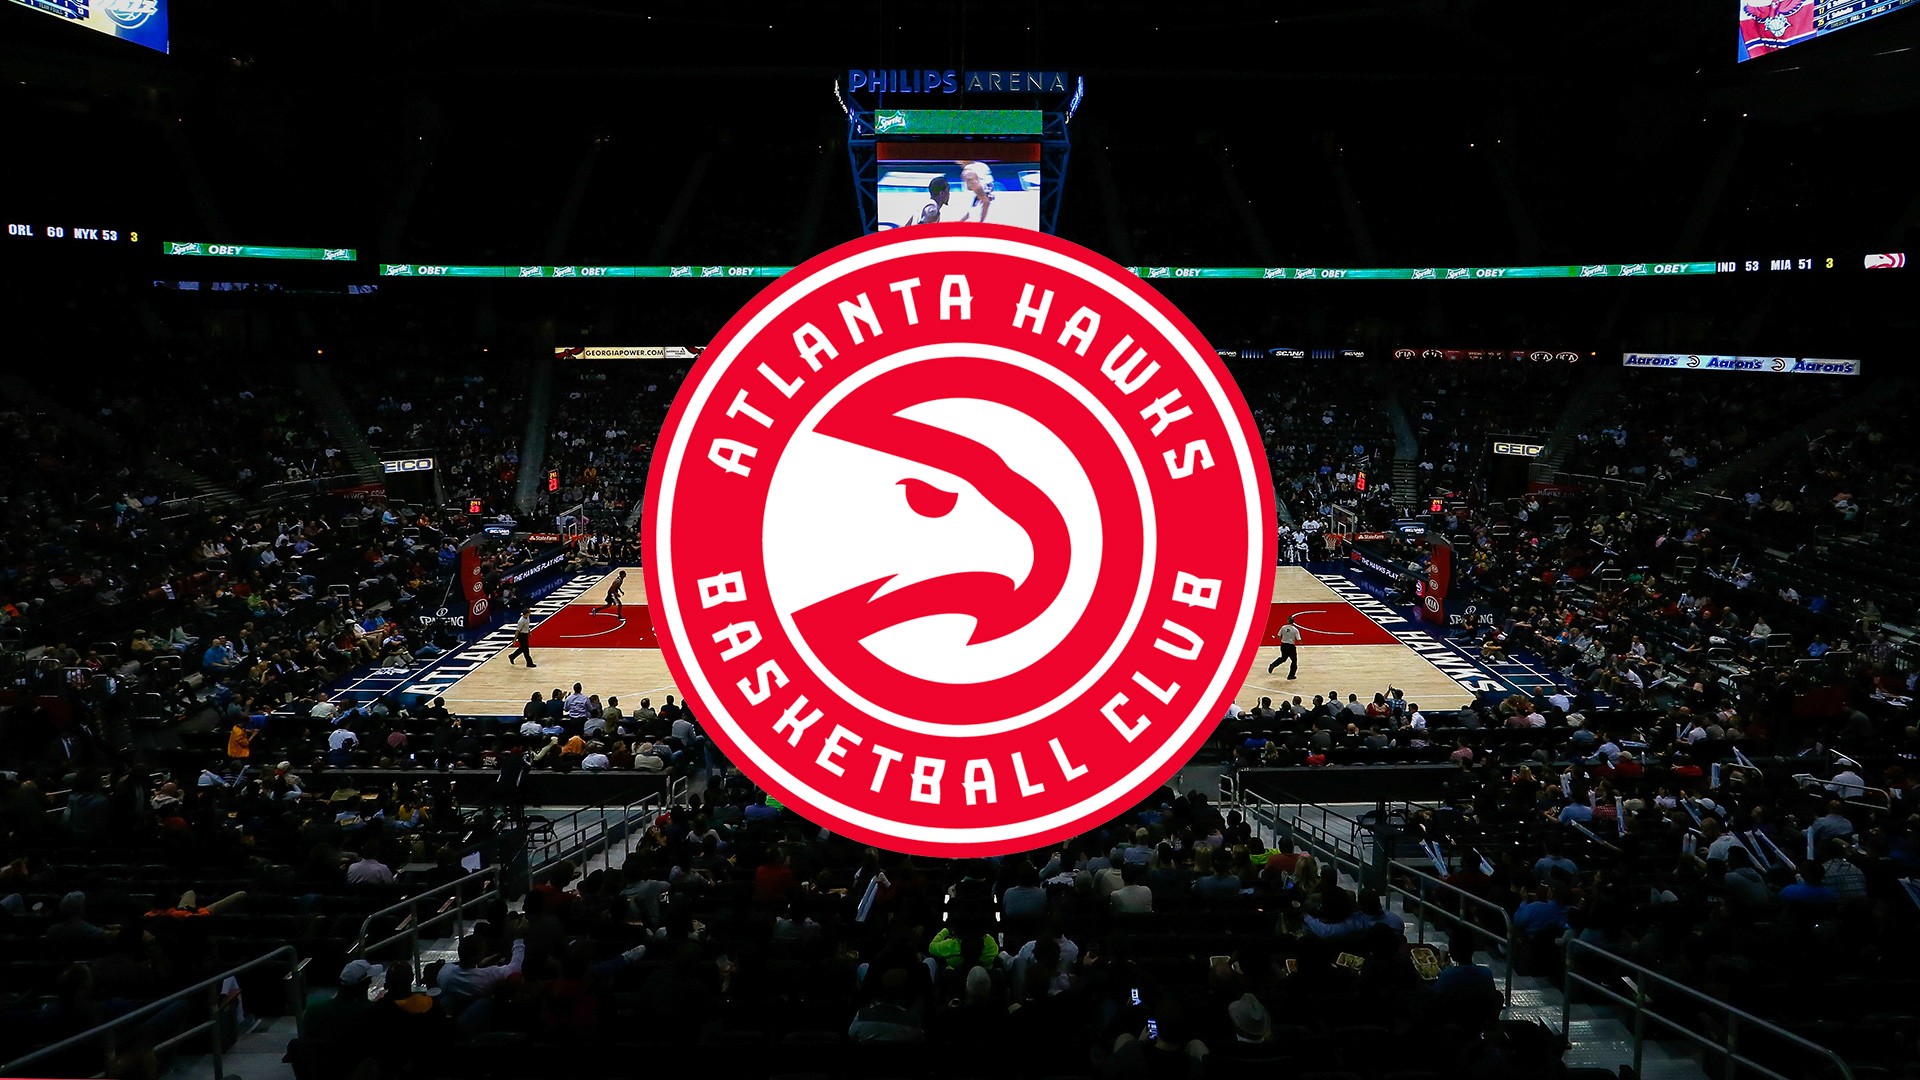 Atlanta Hawks For Desktop Wallpaper with image dimensions 1920x1080 pixel. You can make this wallpaper for your Desktop Computer Backgrounds, Windows or Mac Screensavers, iPhone Lock screen, Tablet or Android and another Mobile Phone device